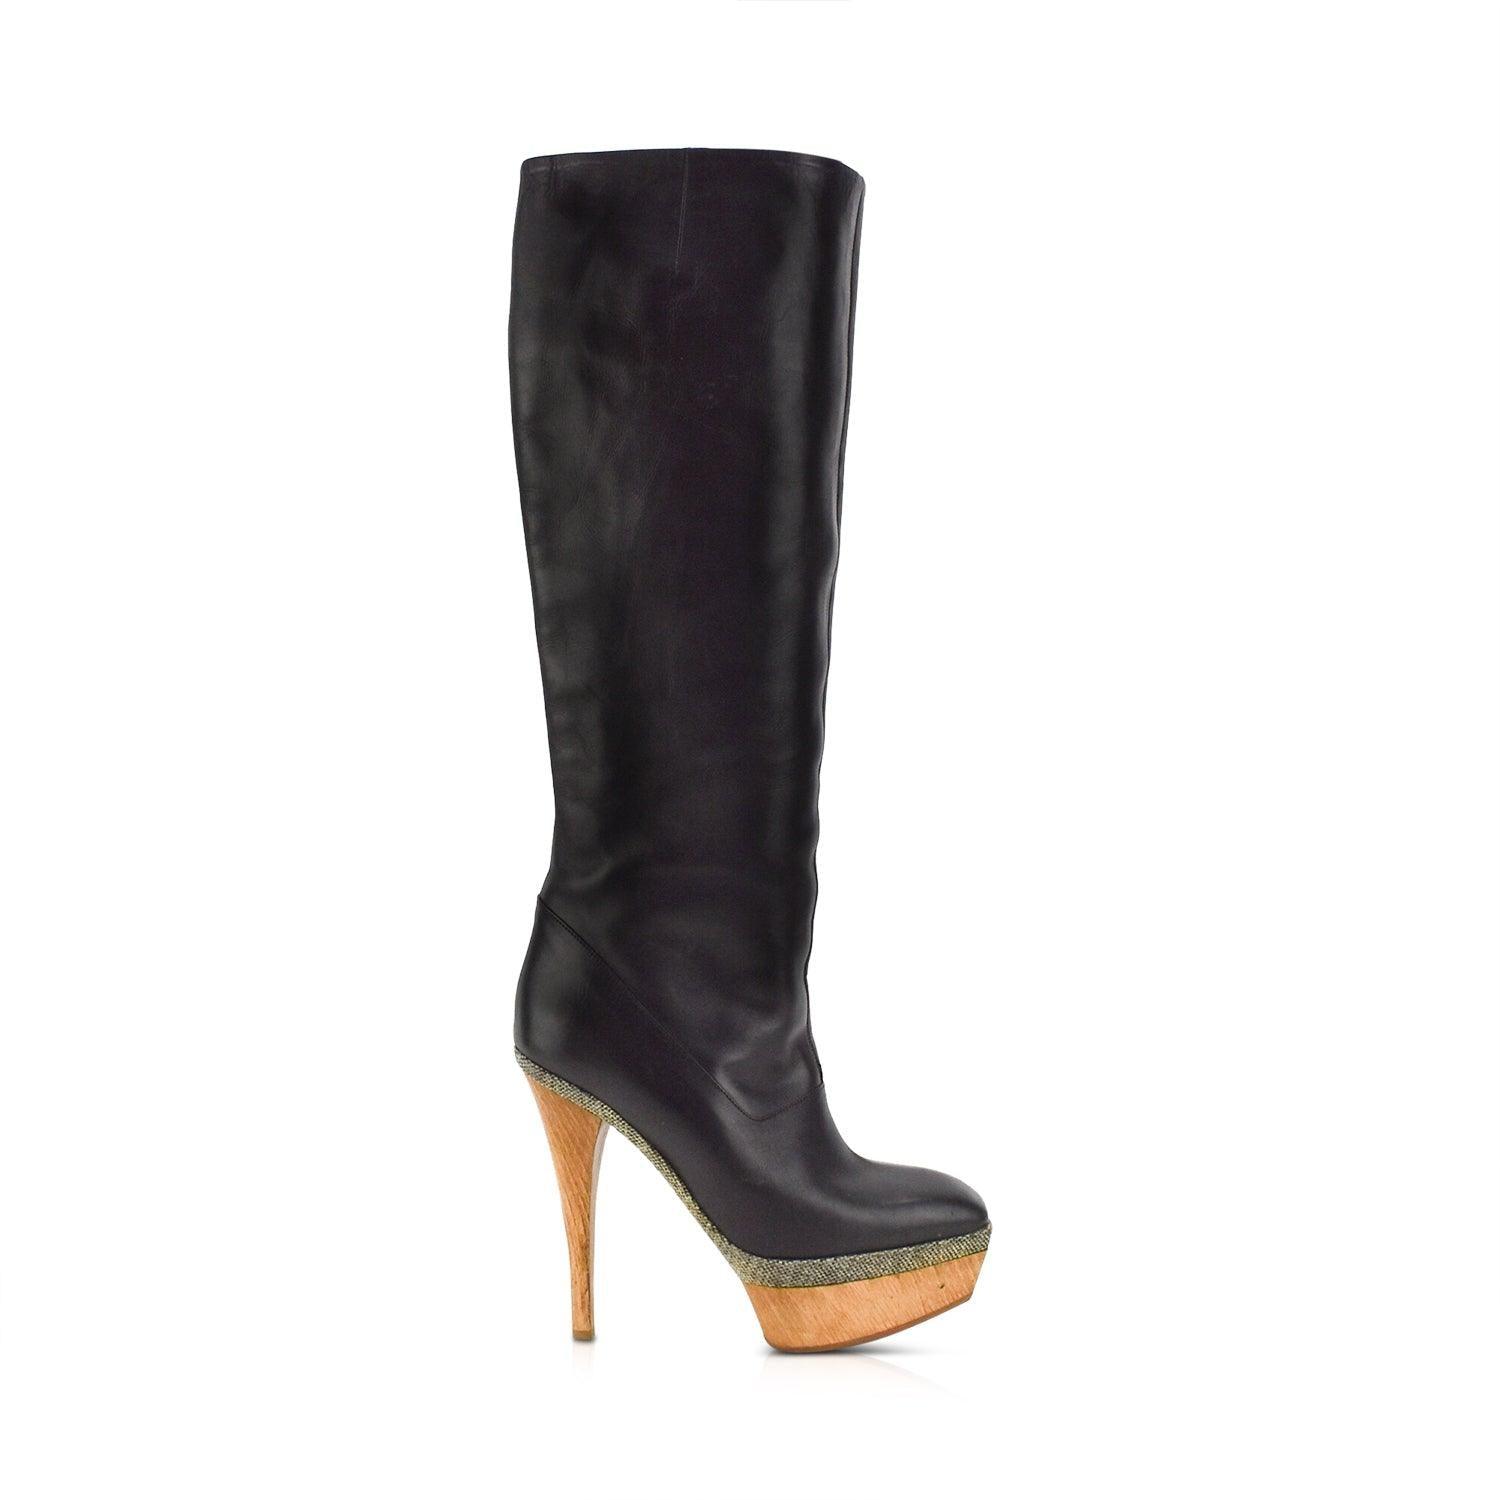 Marni Boots - Women's 38.5 - Fashionably Yours